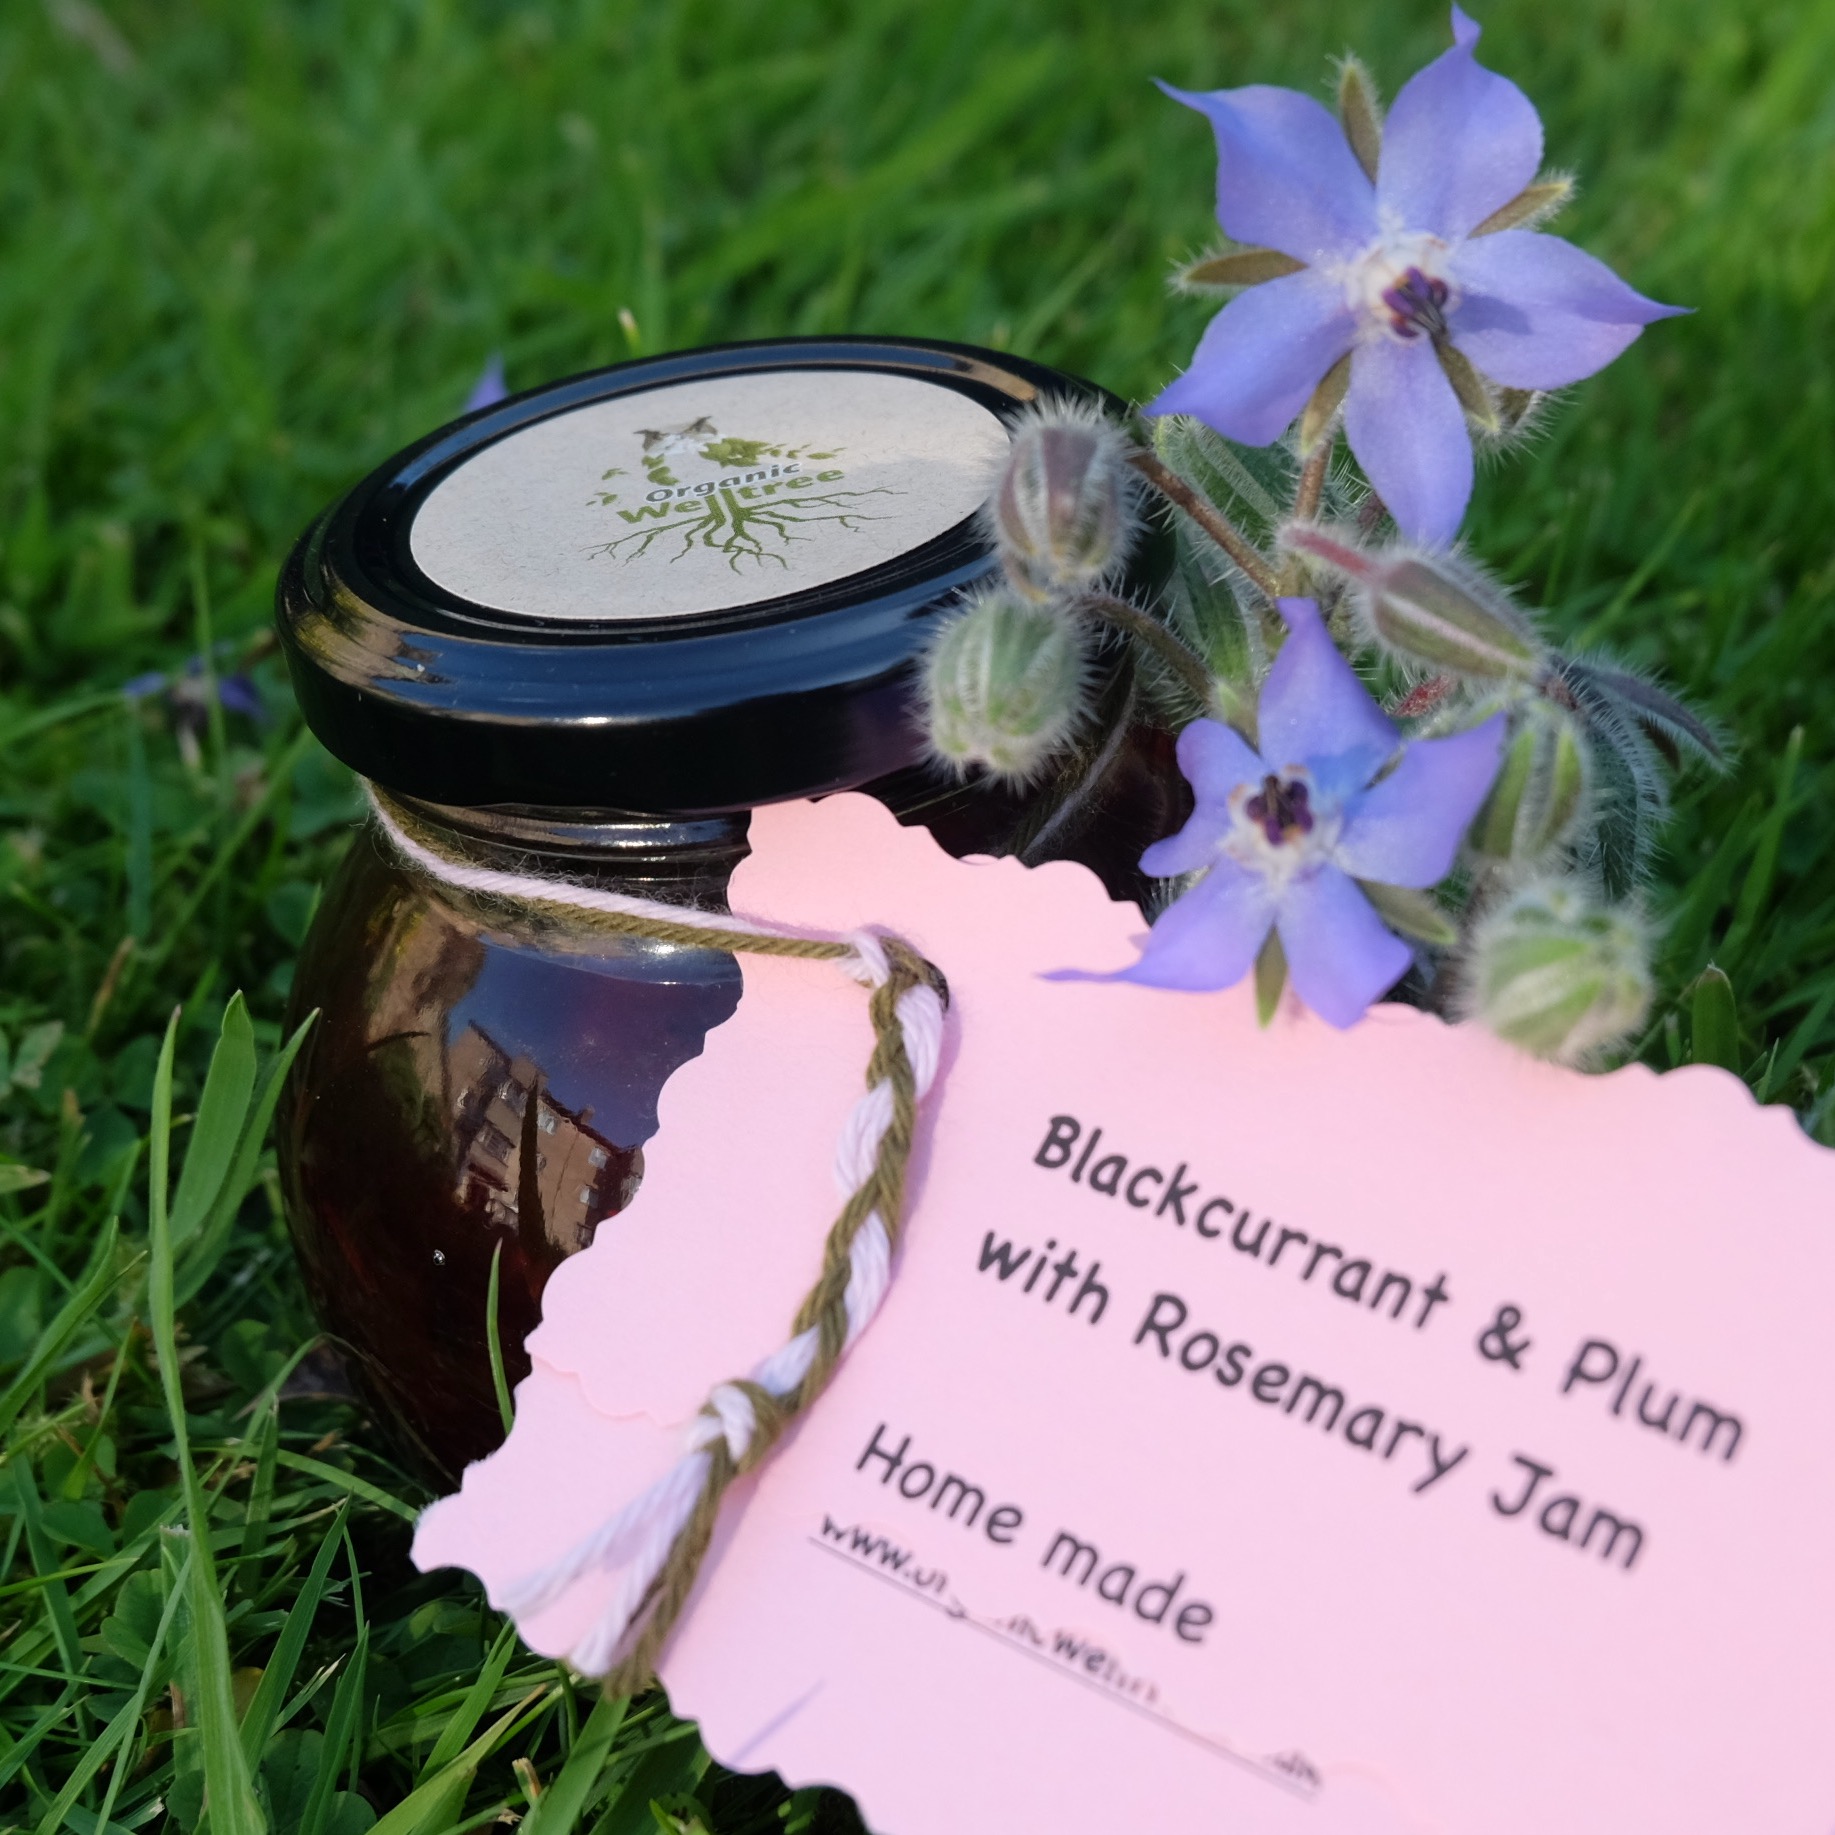 Blackcurrant & Plum with Rosemary (200g) 